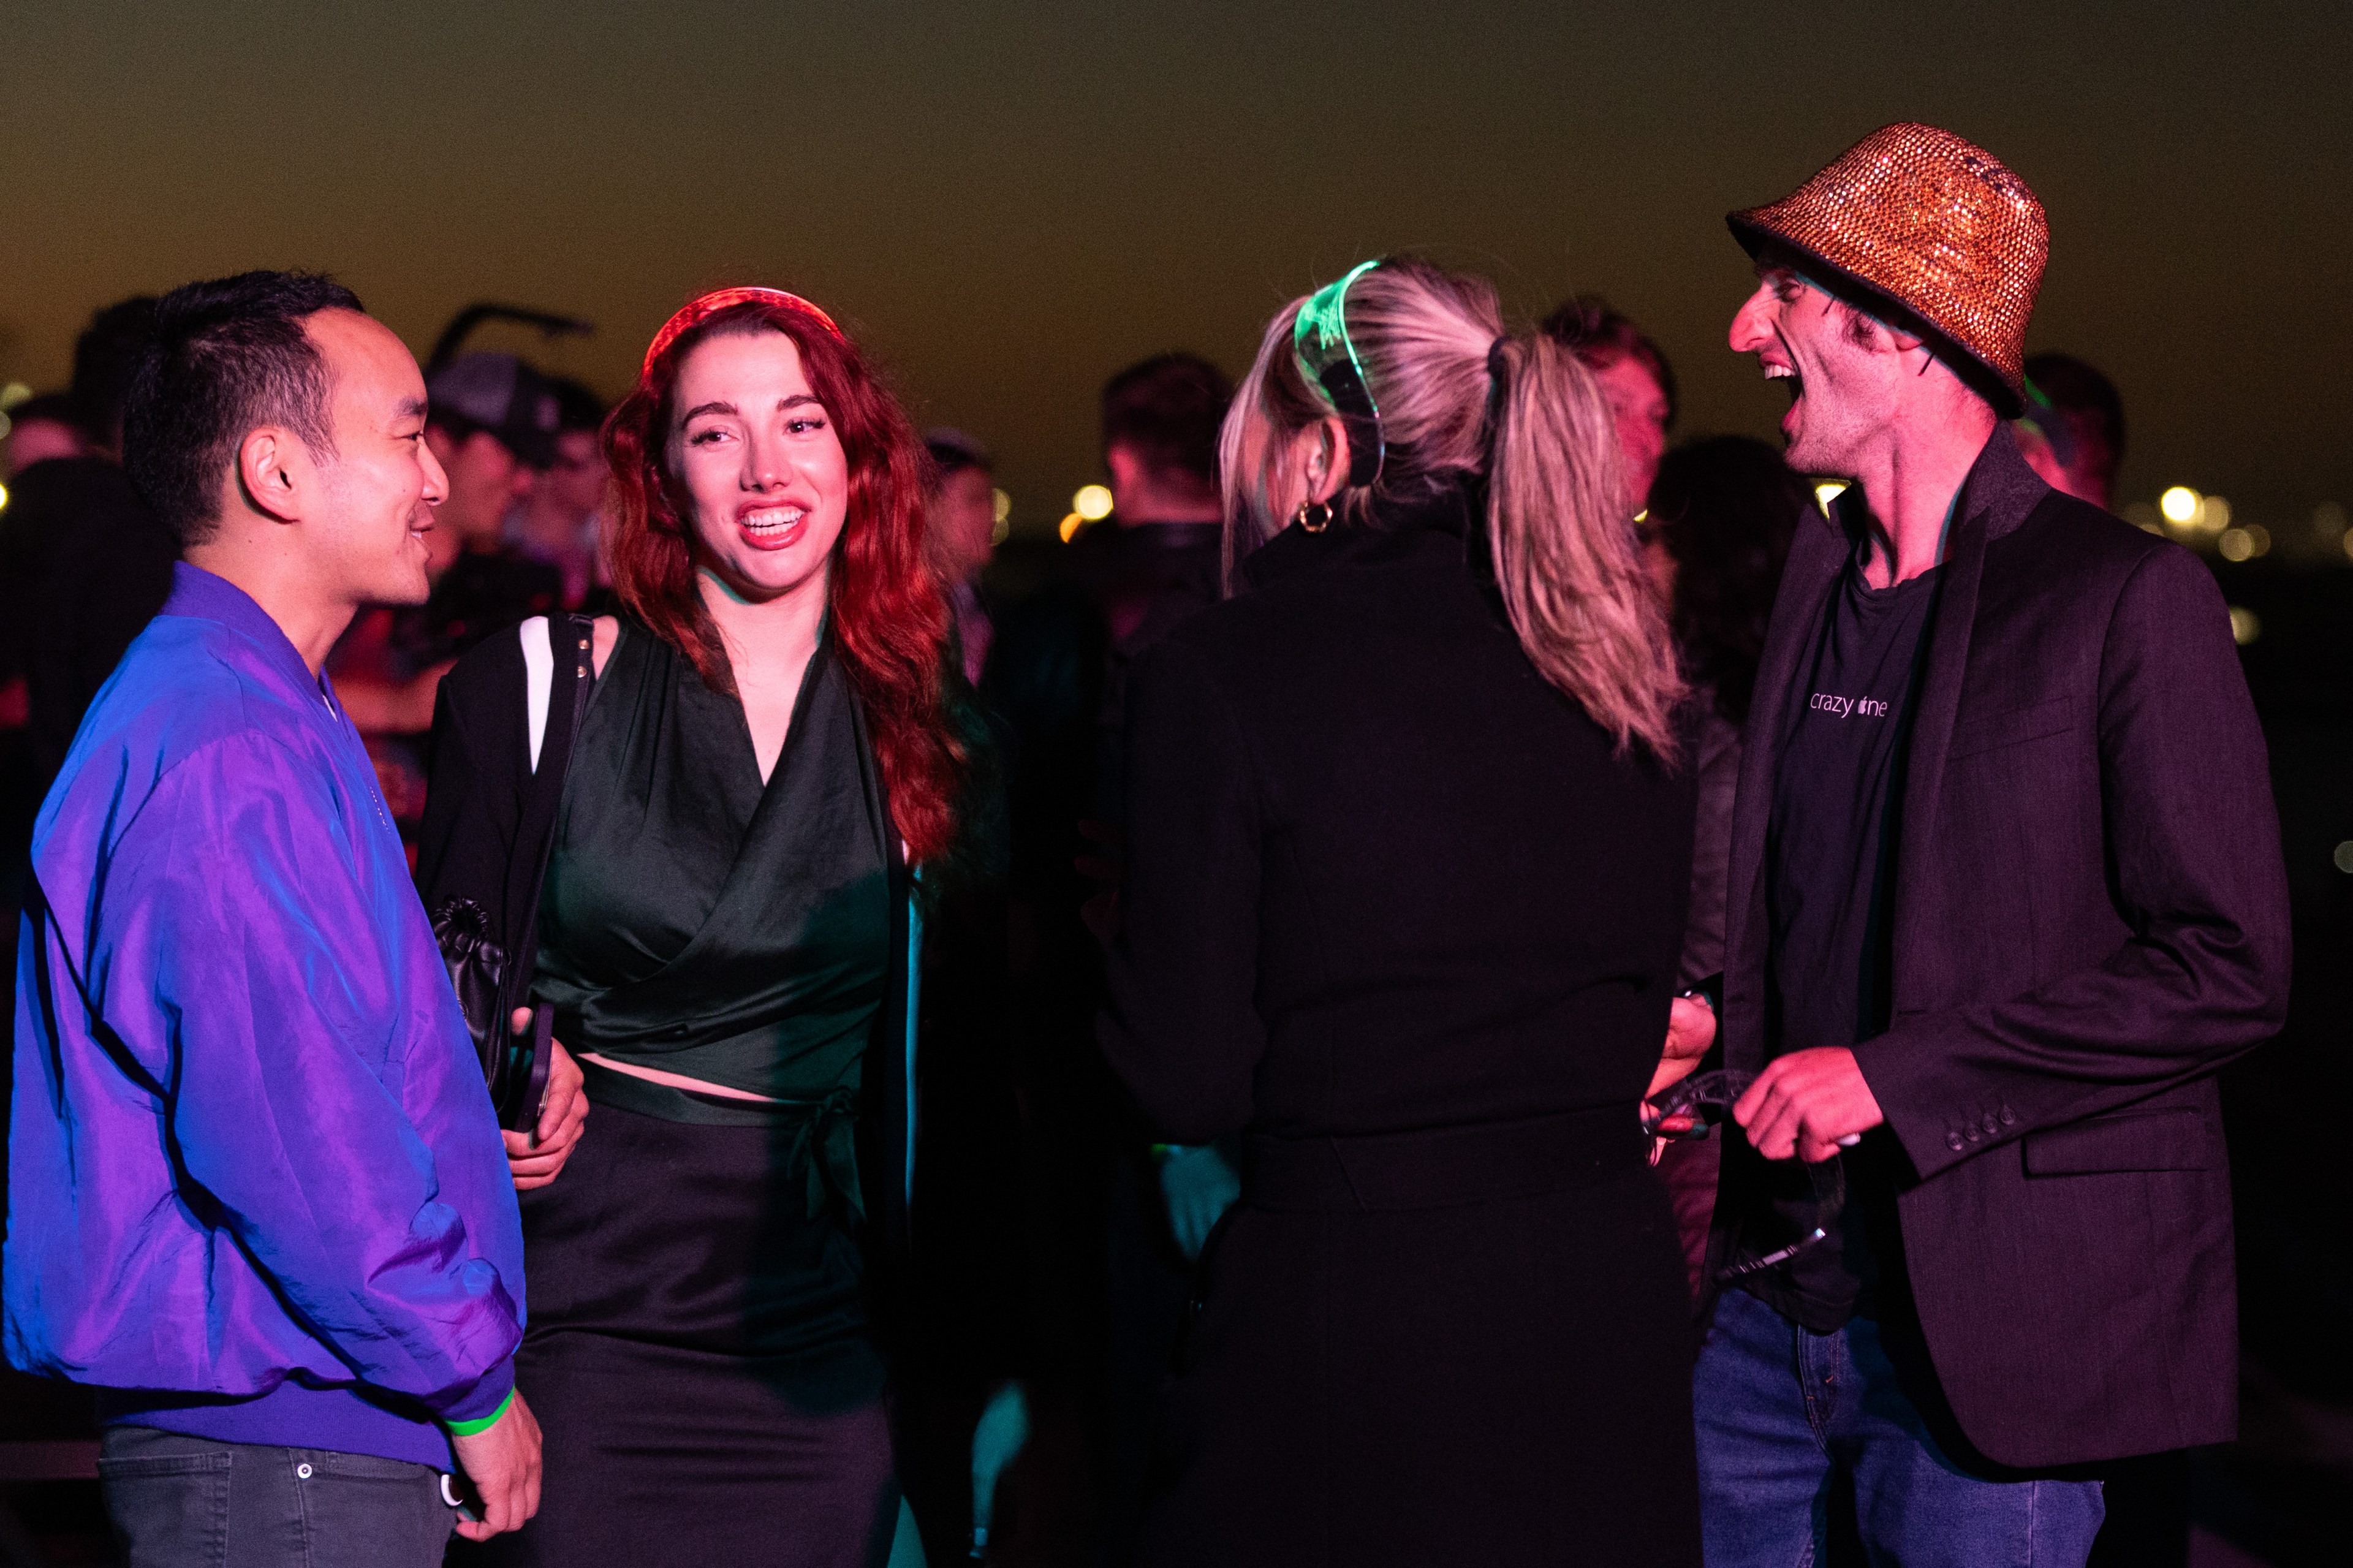 Four people are enjoying a night out, chatting and laughing under dim lights. One woman has red hair, another has a ponytail, a man wears a shiny hat, and another wears a bright jacket.